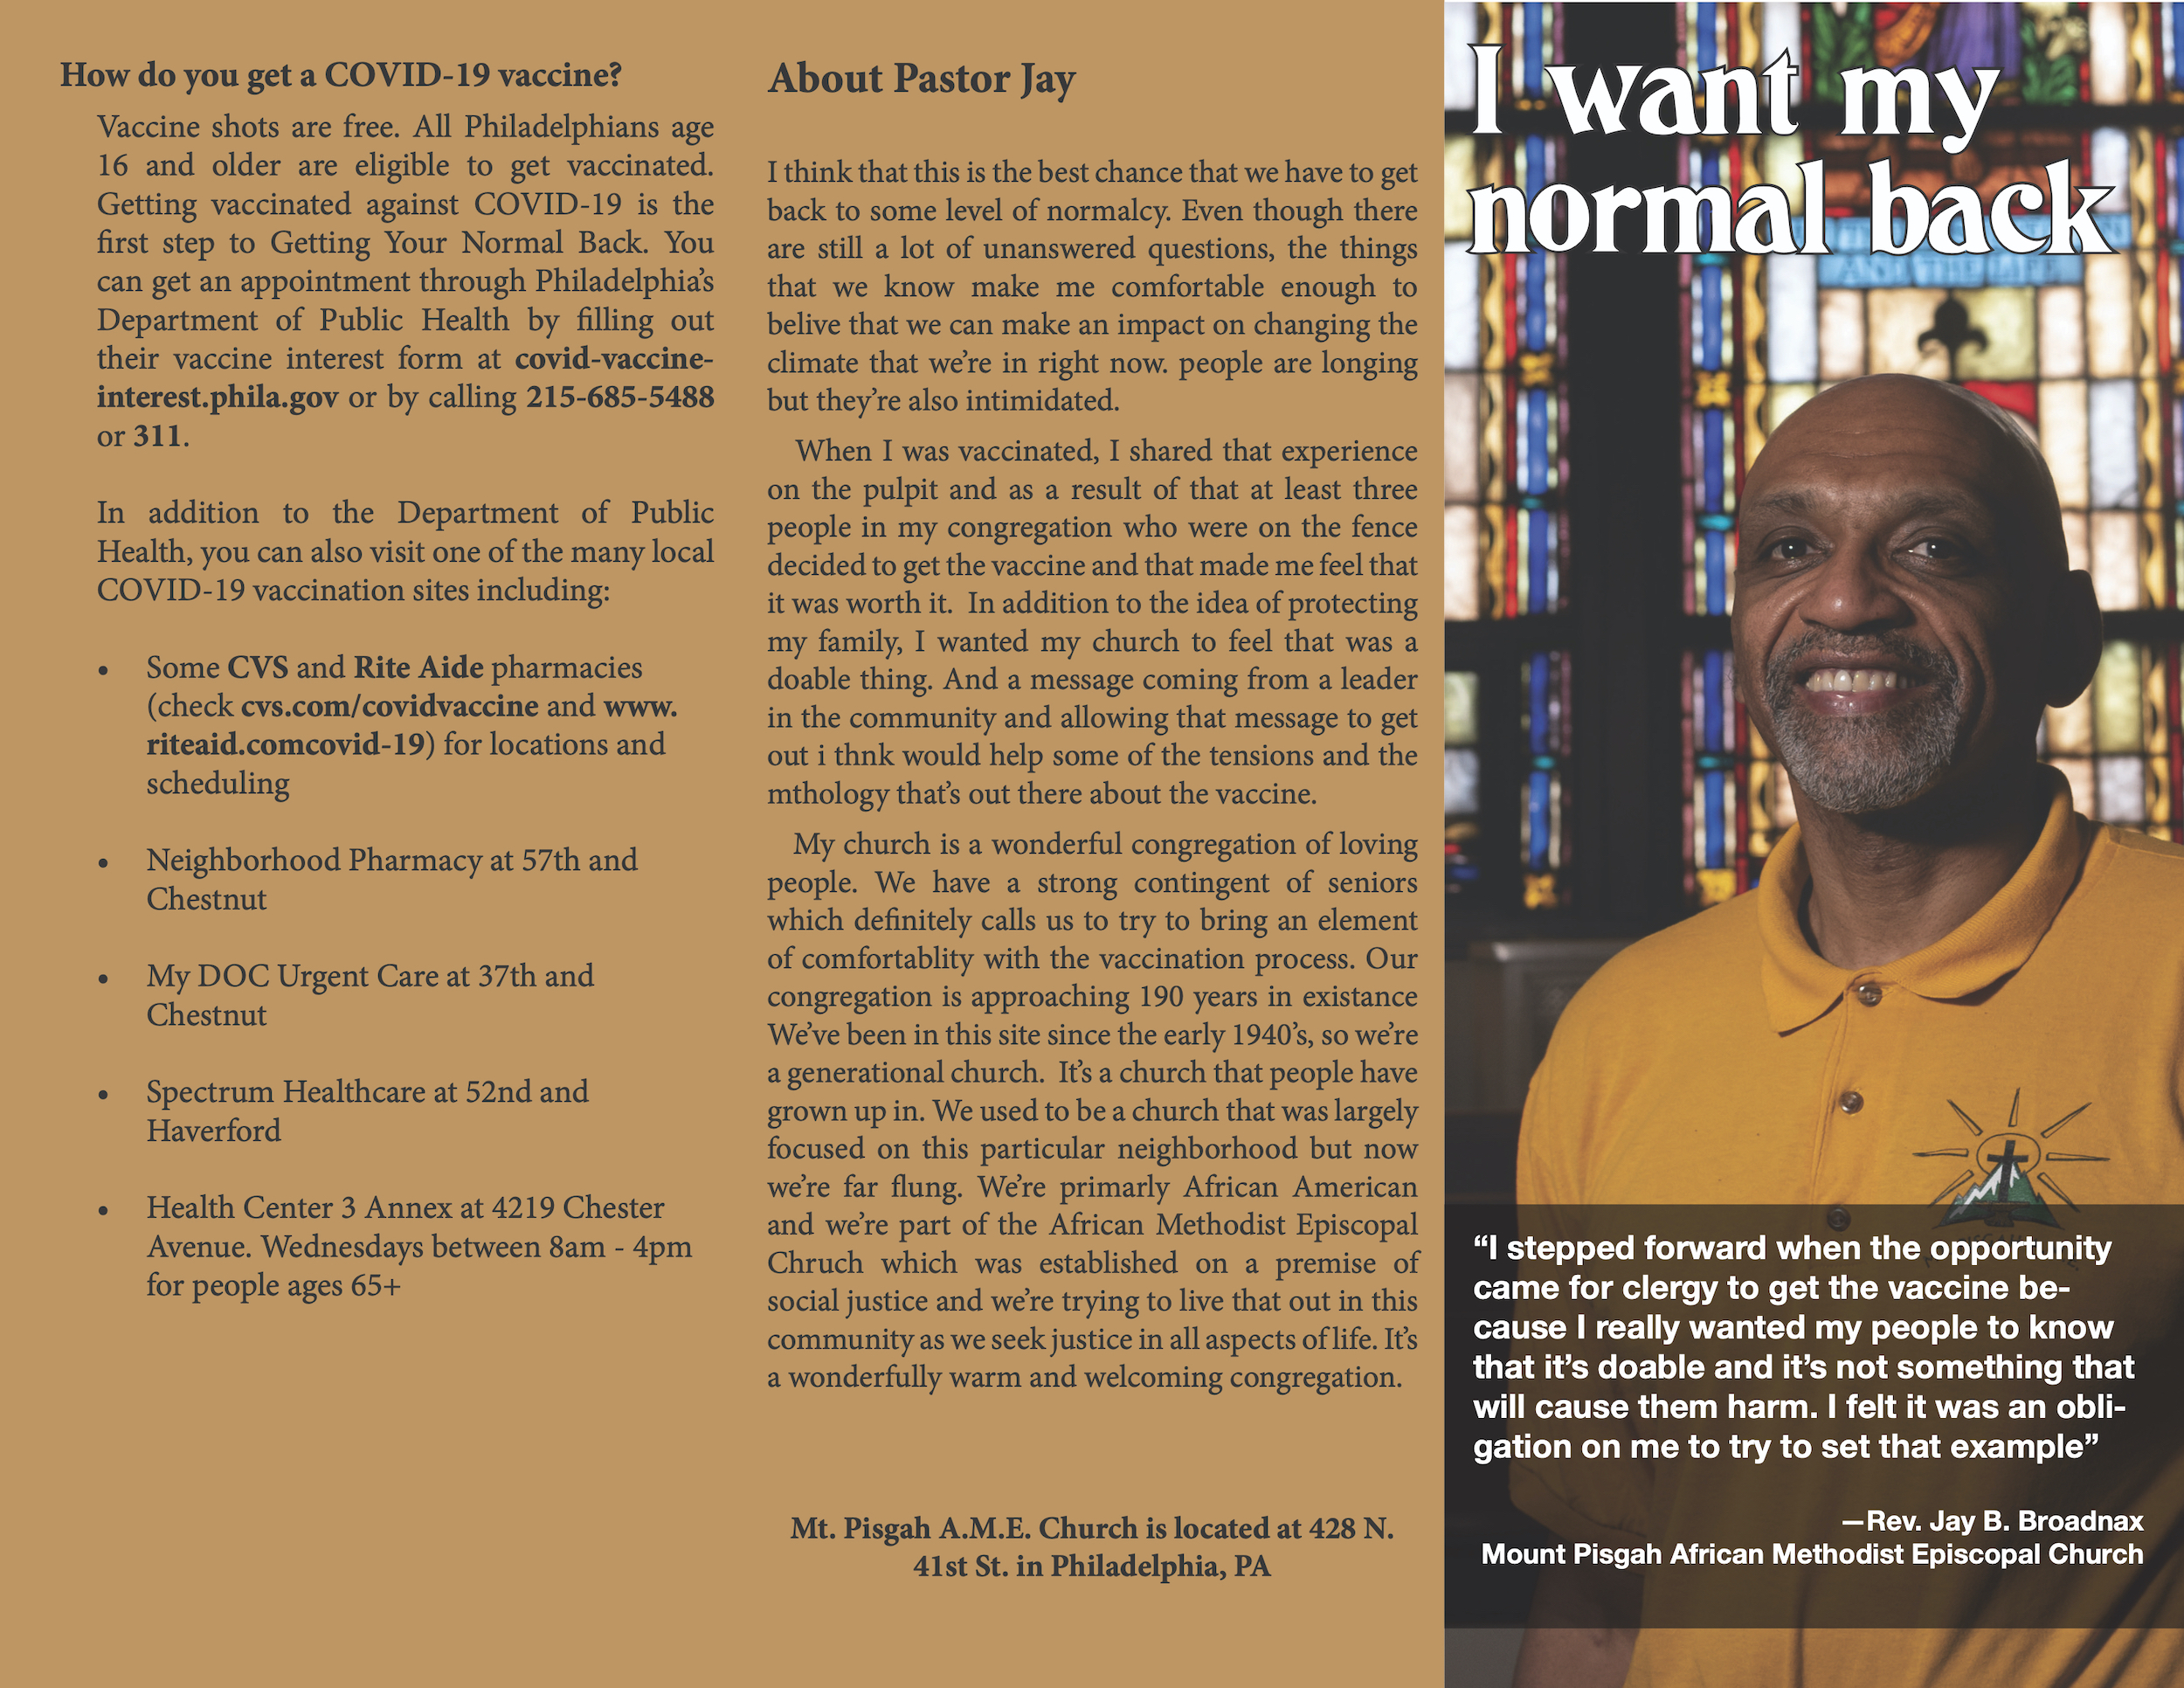 A brochure of a pastor standing in front of a stained glass window. The words "I want my normal back" appear up top. On the bottom, it reads, "I stepped forward when the opportunity came for clergy to get the vaccine because I really wanted my people to know that it's doable and not something that will cause them harm. I felt it was an obligation on me to try to set that example." - Rev. Jay B. Broadnax, Mount Pisgah African Methodist Episcopal Church